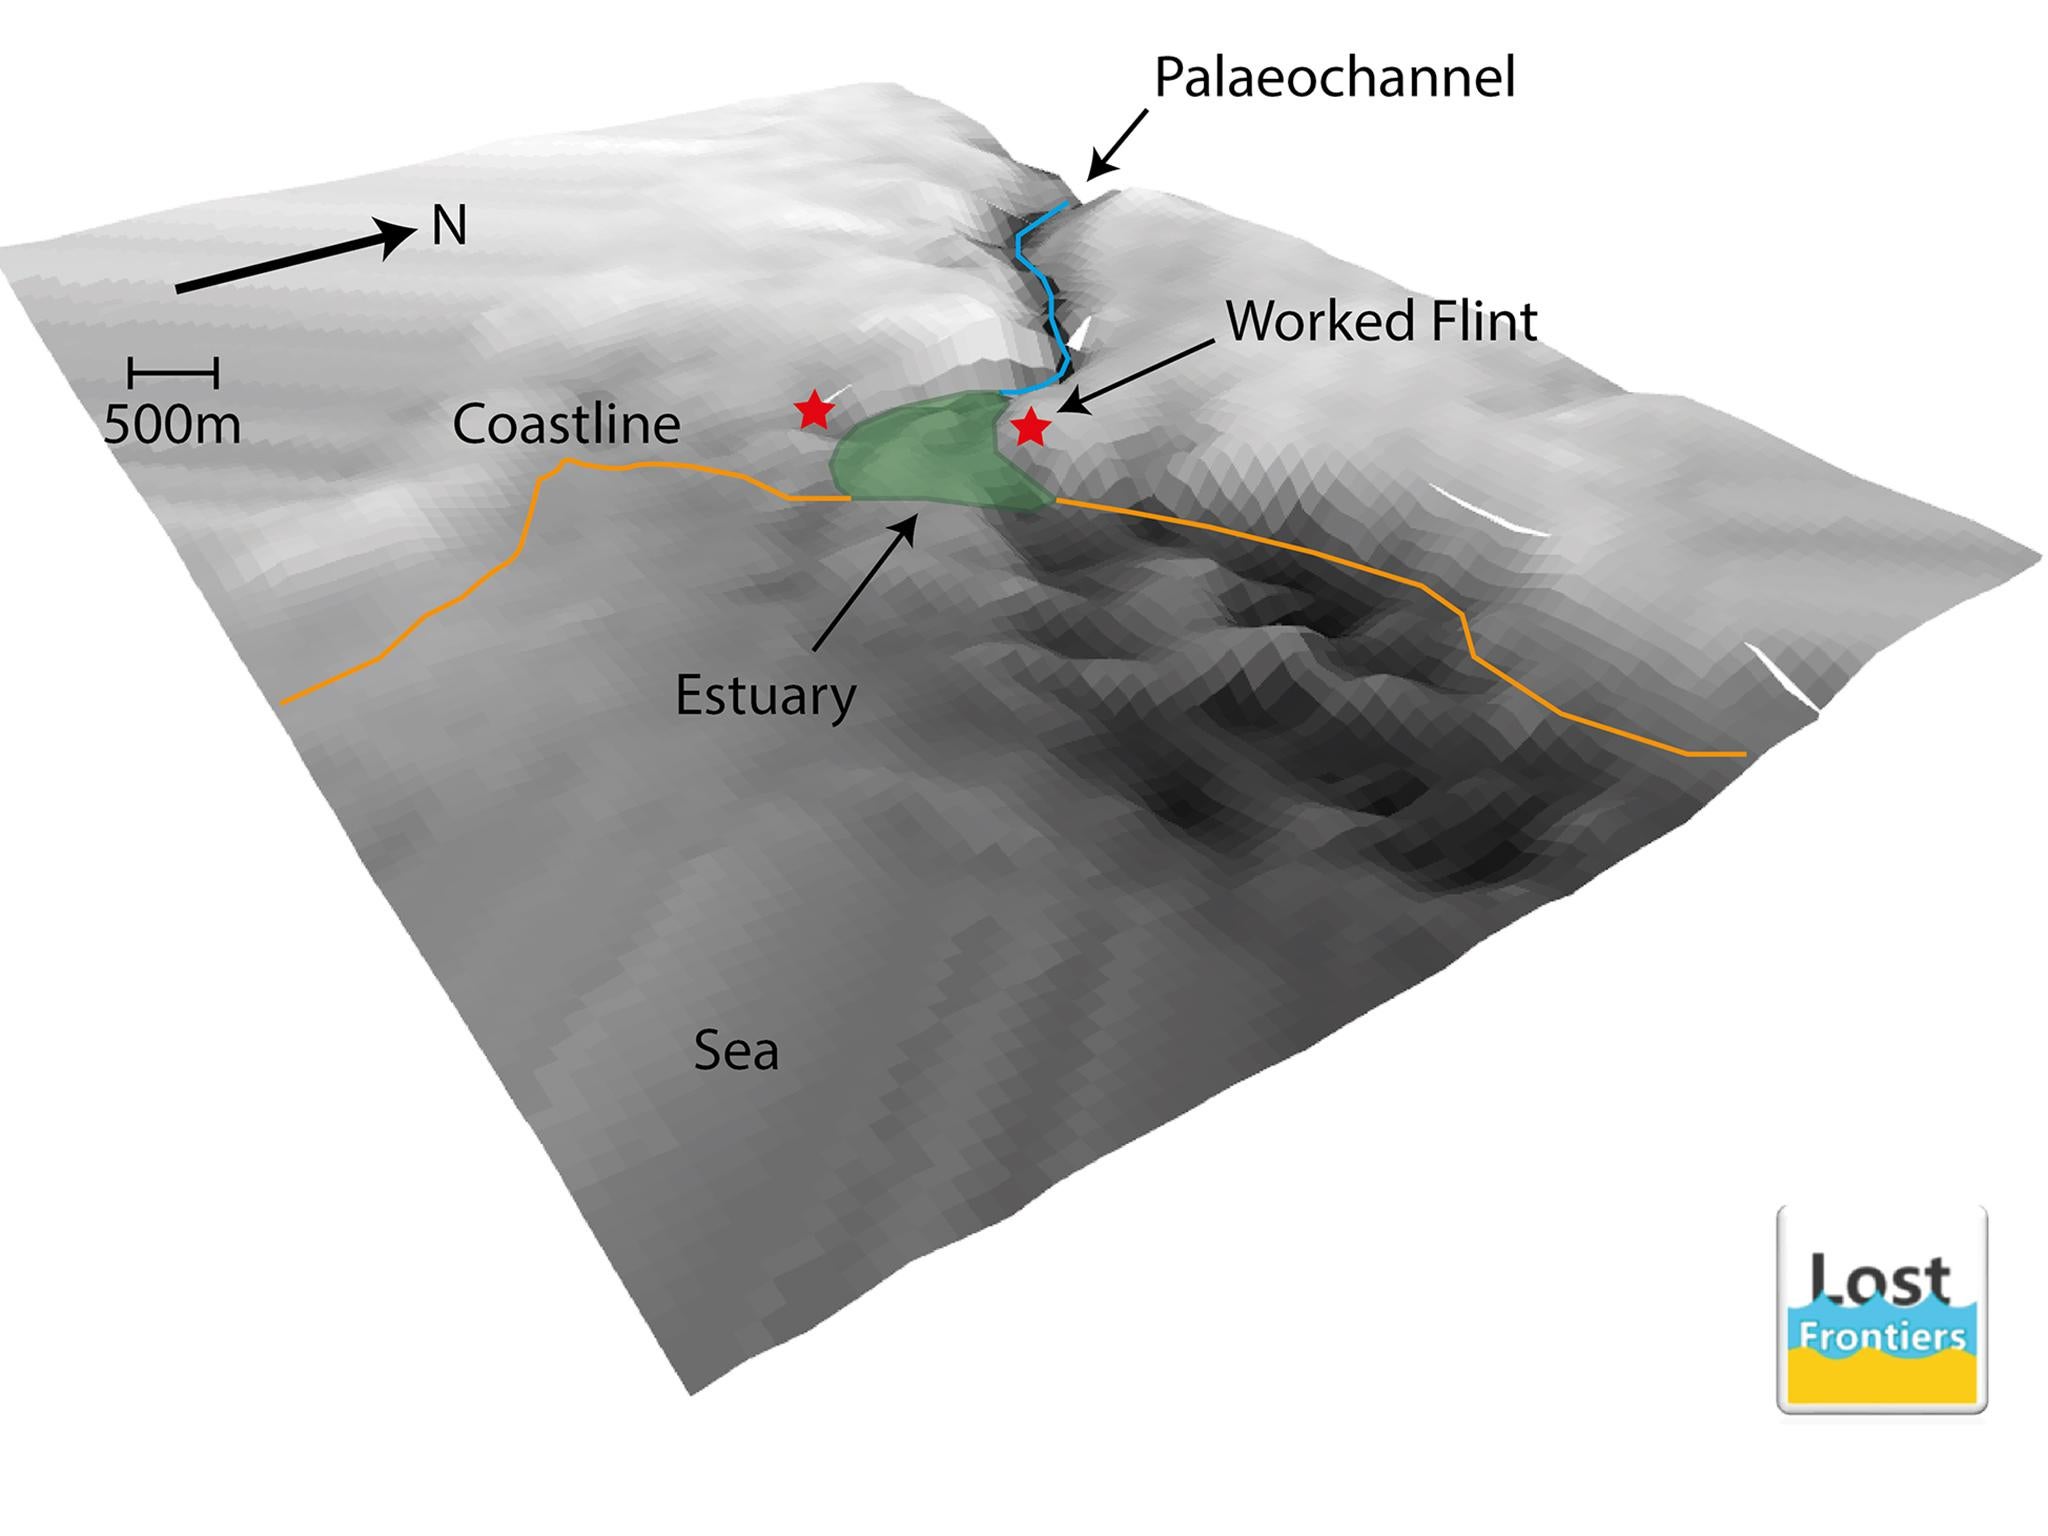 Remote sensing investigations, carried out by the archaeologists and geophysicists, have for the first time, revealed what the site would have looked like before it was inundated by the sea some 8000 years ago. The river valley and estuary of a now-long- vanished river can be seen quite clearly. The two finds have been discovered on either side of the estuary, precisely where archaeologists would expect prehistoric campsites and settlements to be located